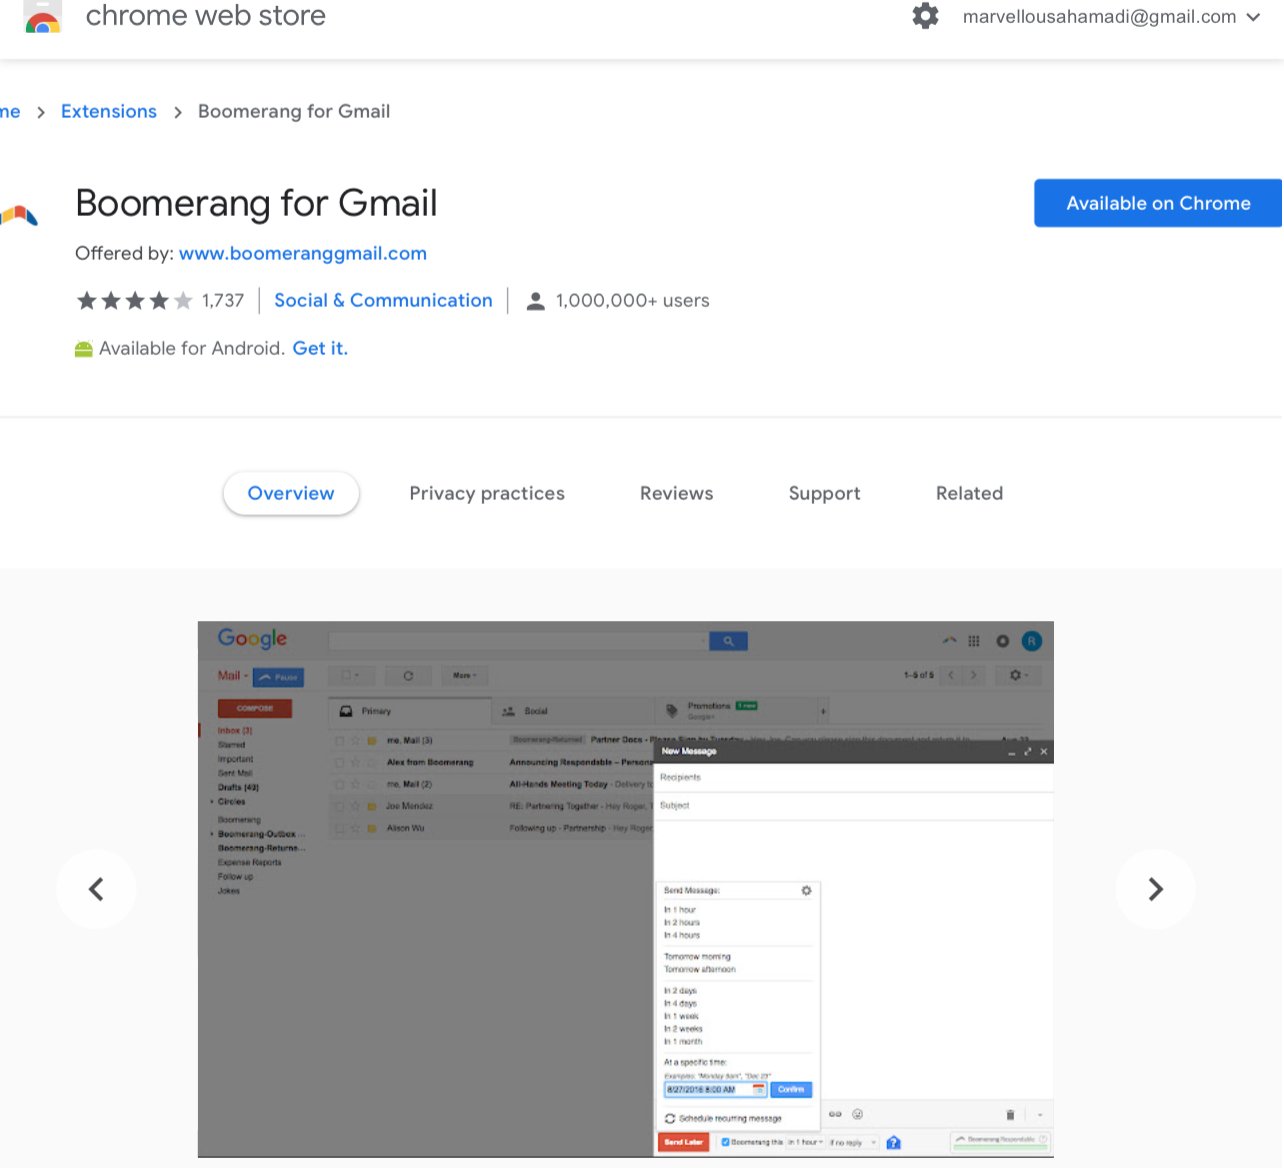 Screenshot of the Boomerang email marketing extension for Gmail in the Google Chrome web store